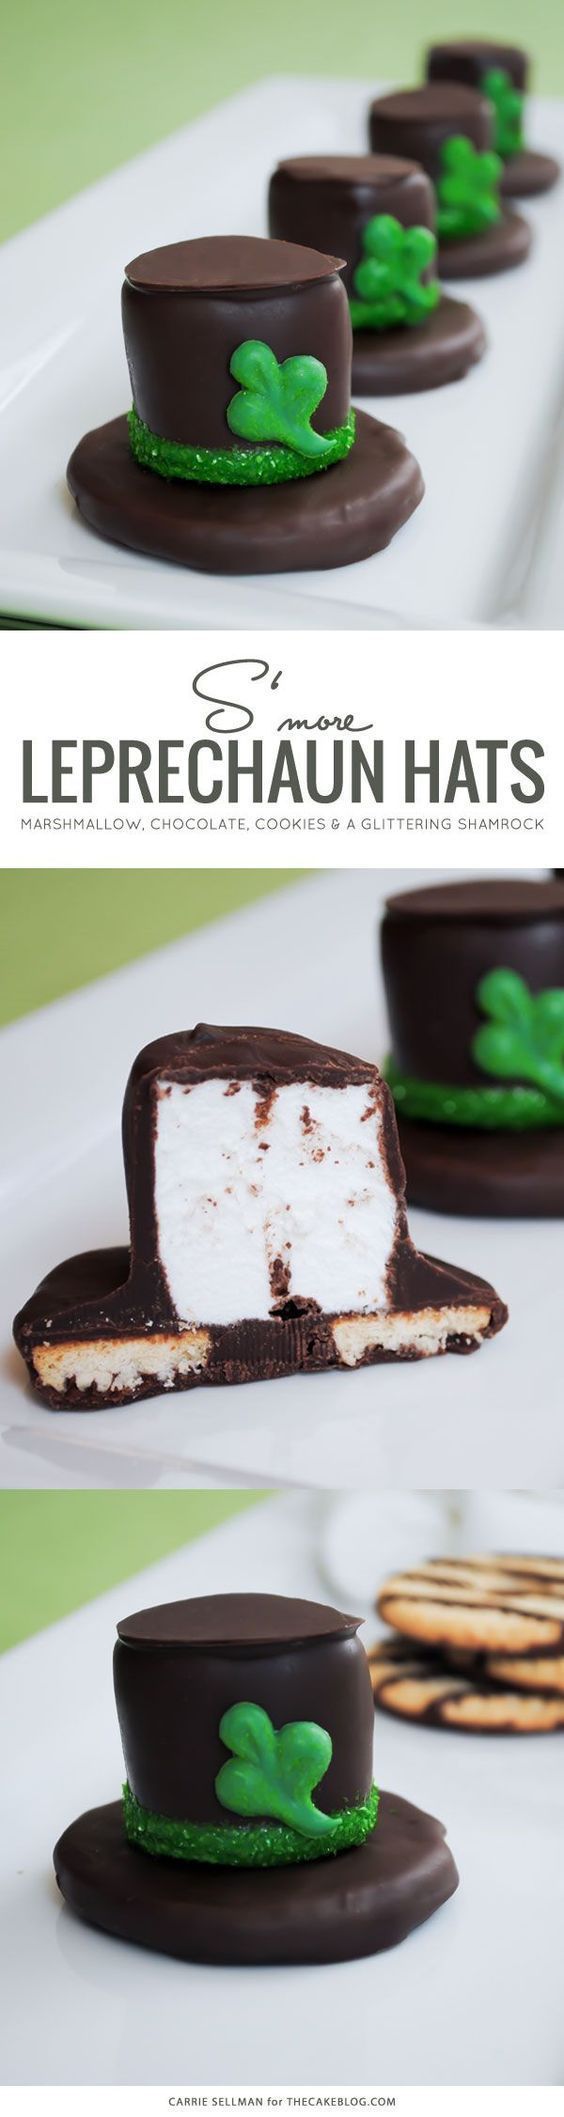 Leprechaun Hat Smores Treats Recipe and Tutorial for St. Patricks Day | by Carrie Sellman for The Cake Blog